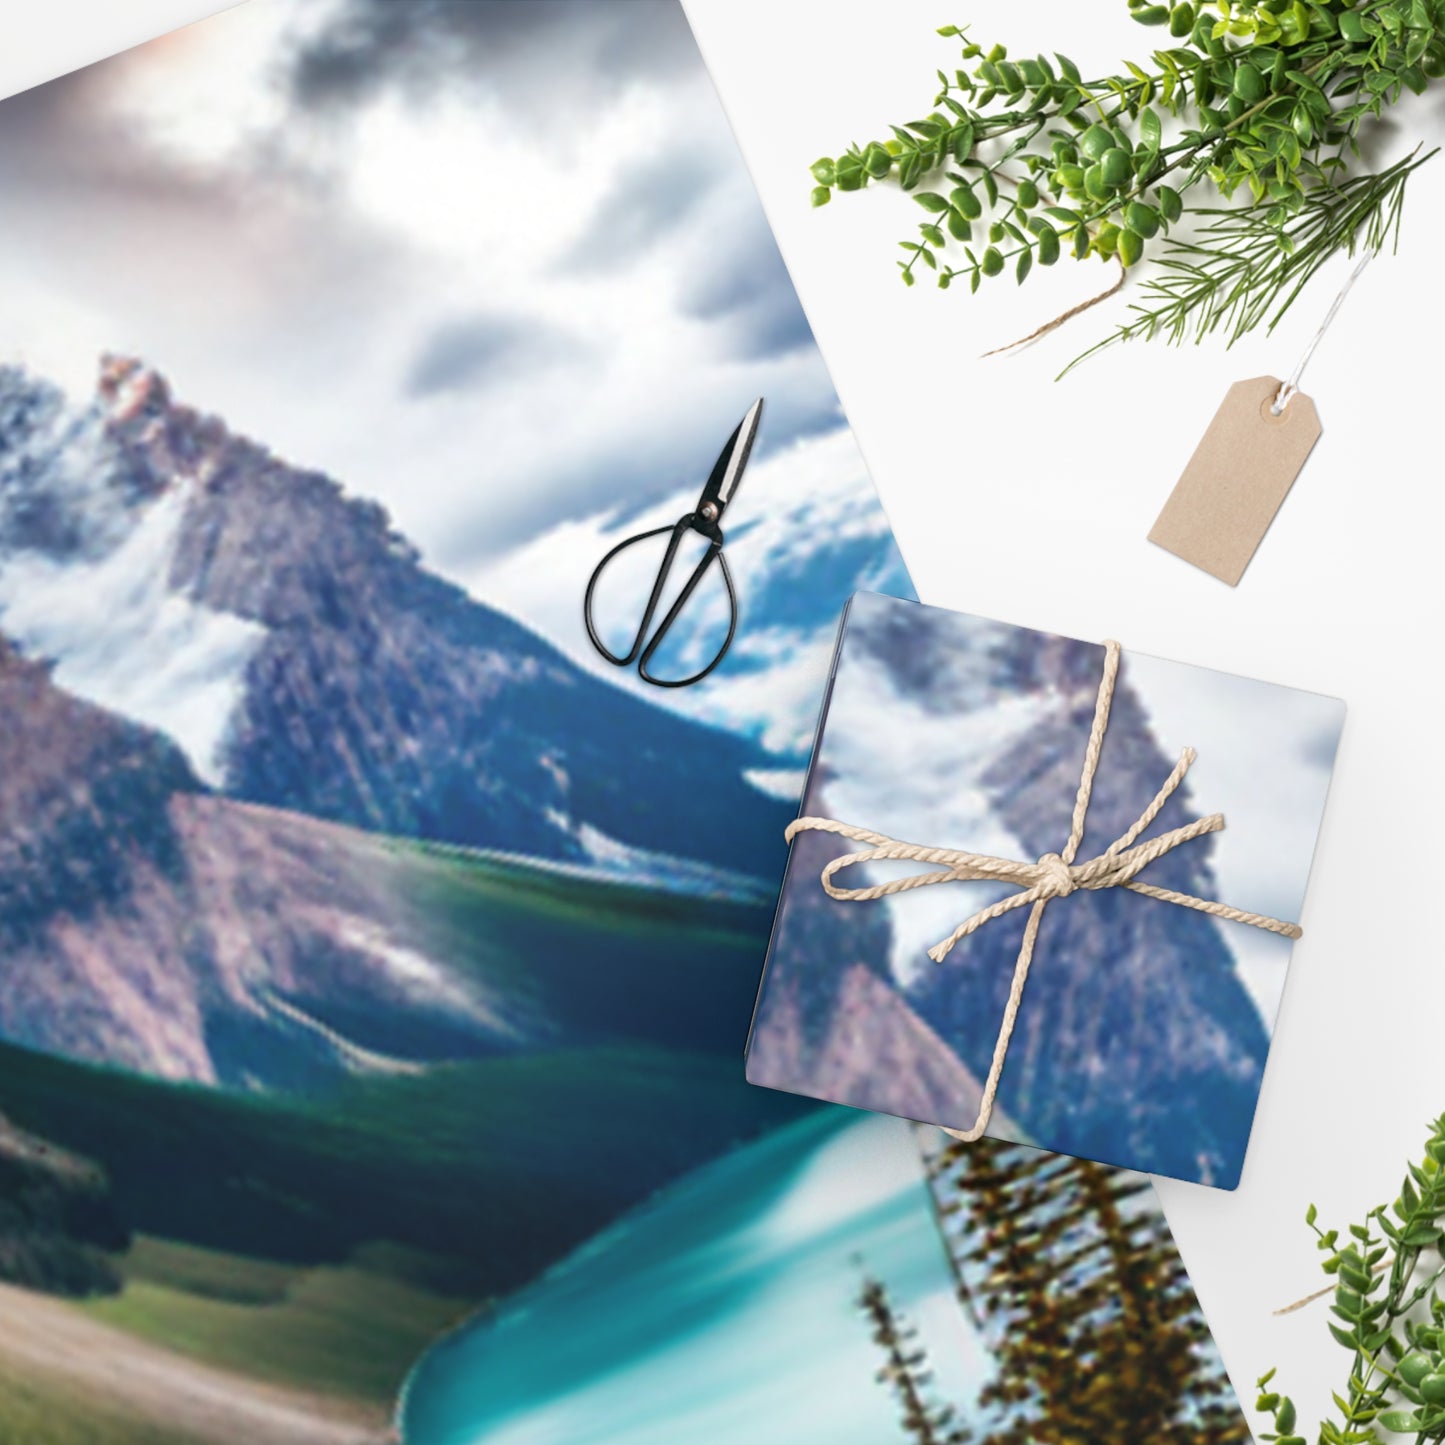 Alberta Mountains Wrapping Paper